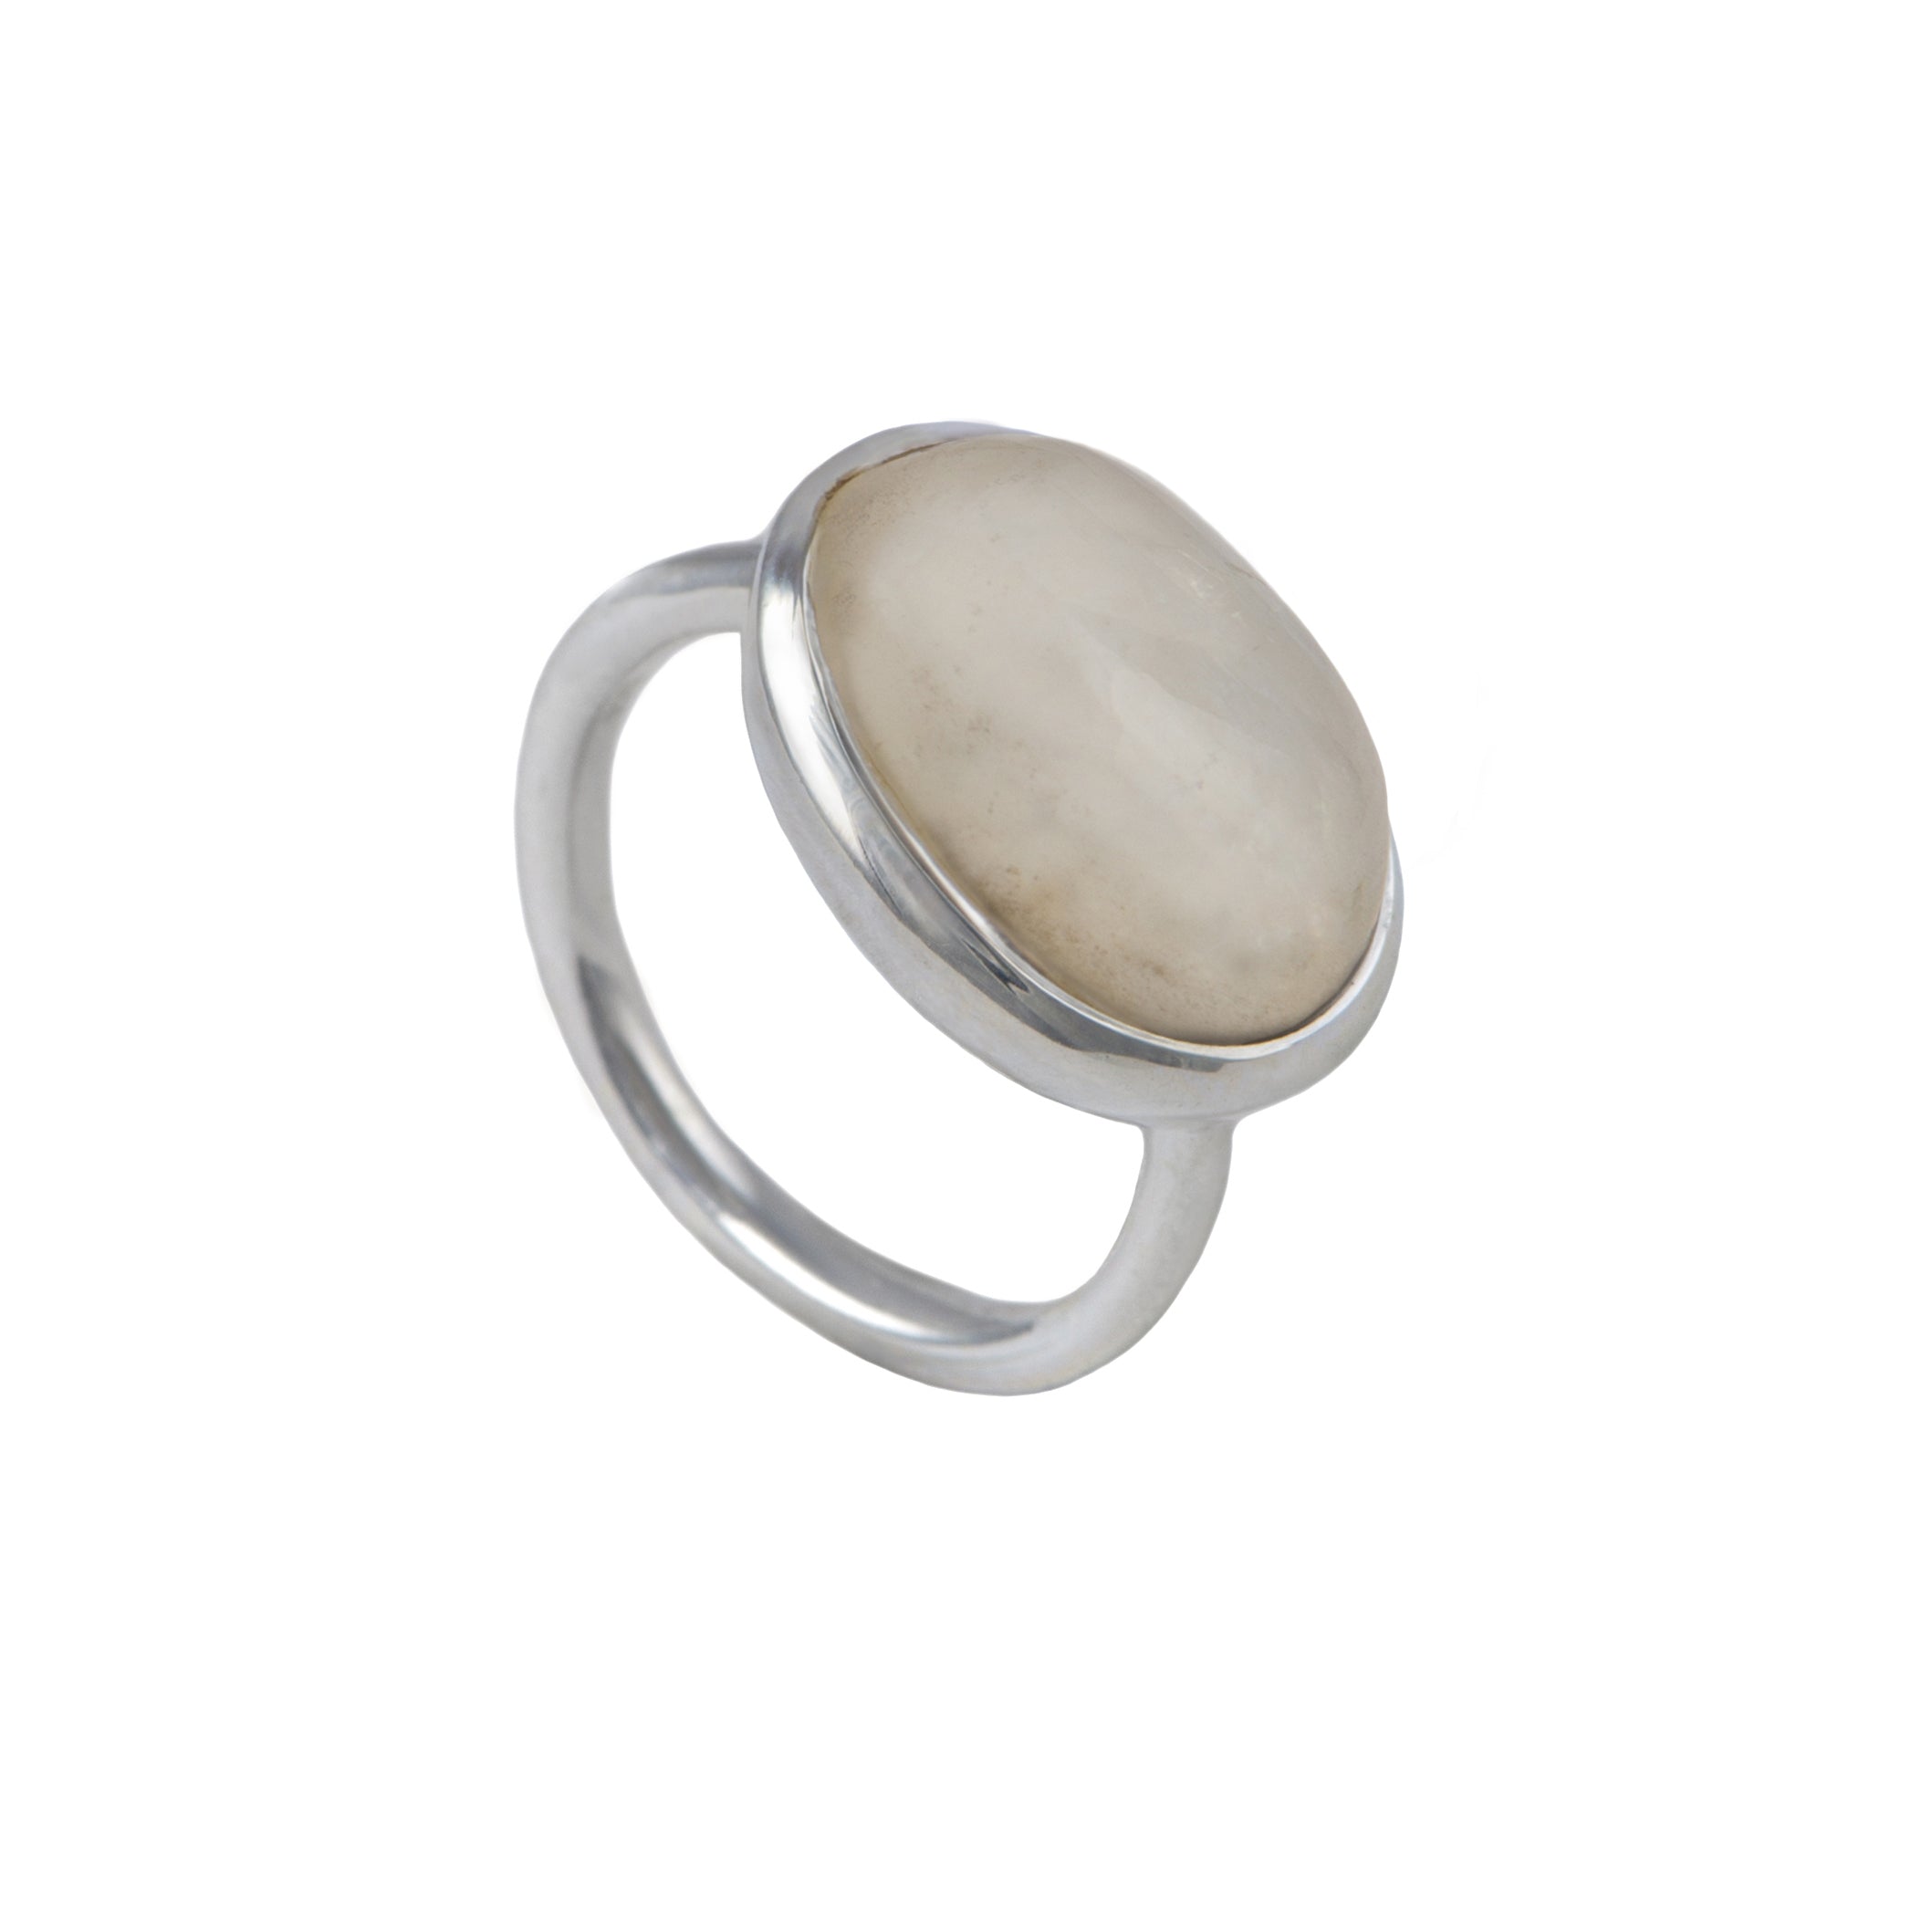 Cabochon Oval Cut Natural Gemstone Sterling Silver Ring - Moonstone